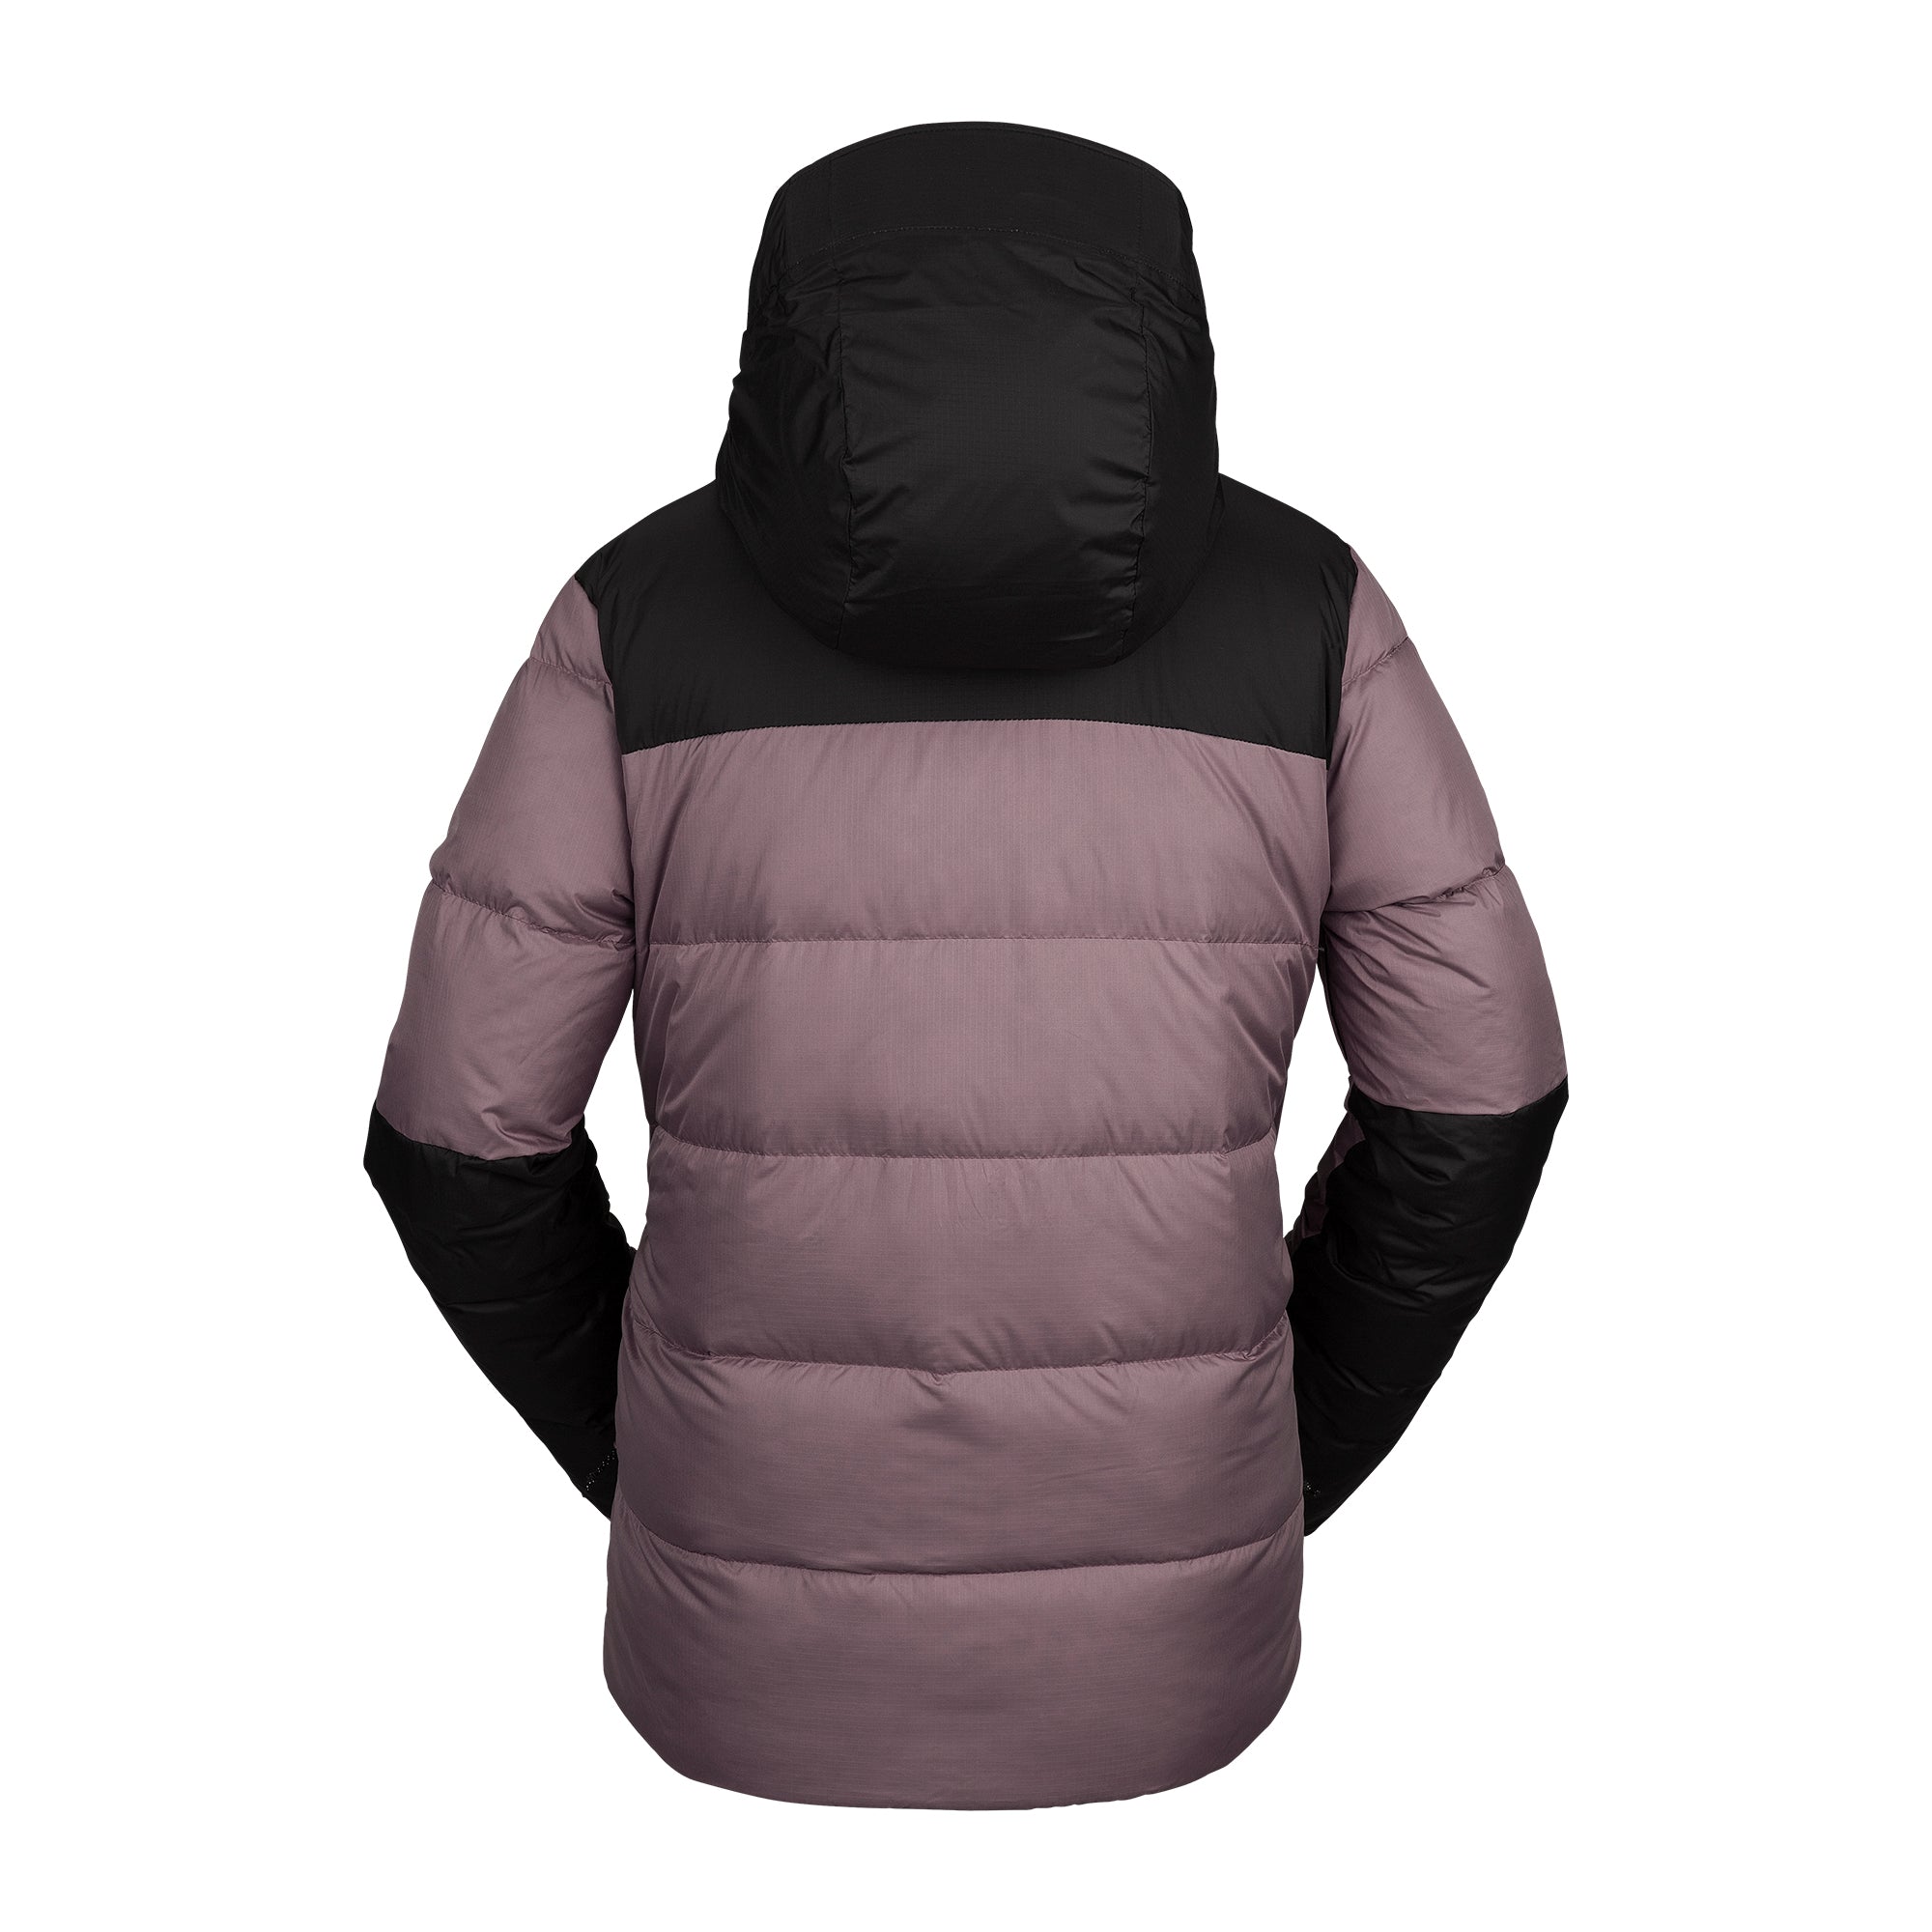 WOMEN'S LIFTED DOWN JACKET